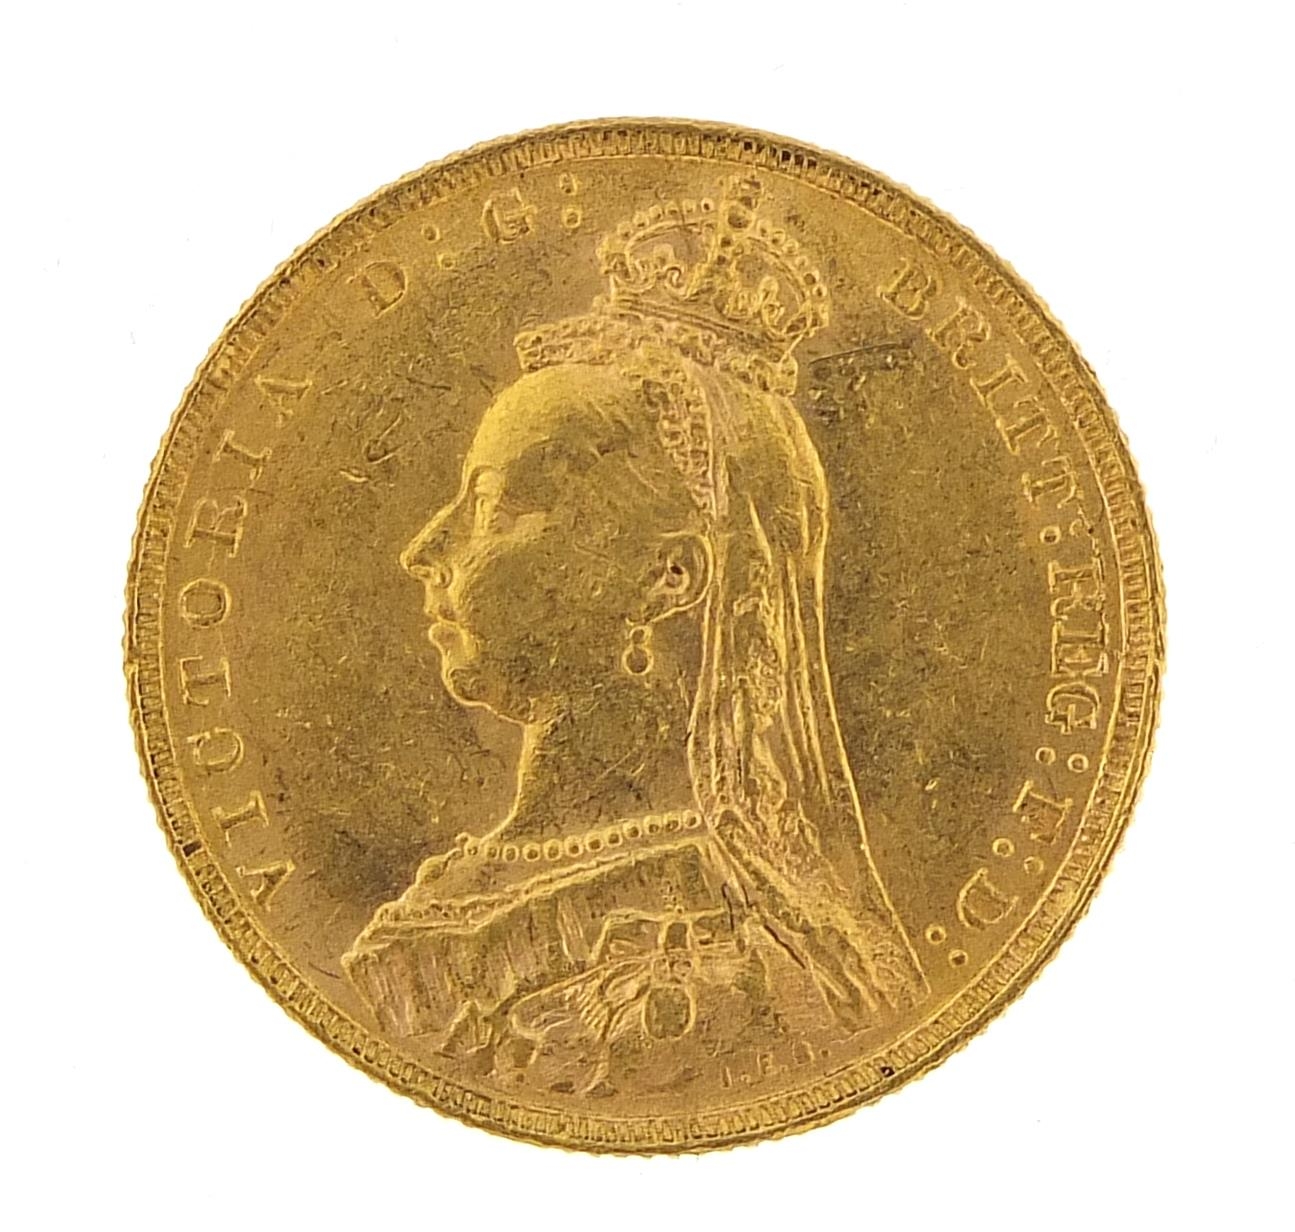 Queen Victoria Jubilee Head 1892 gold sovereign - this lot is sold without buyer?s premium, the - Image 2 of 3